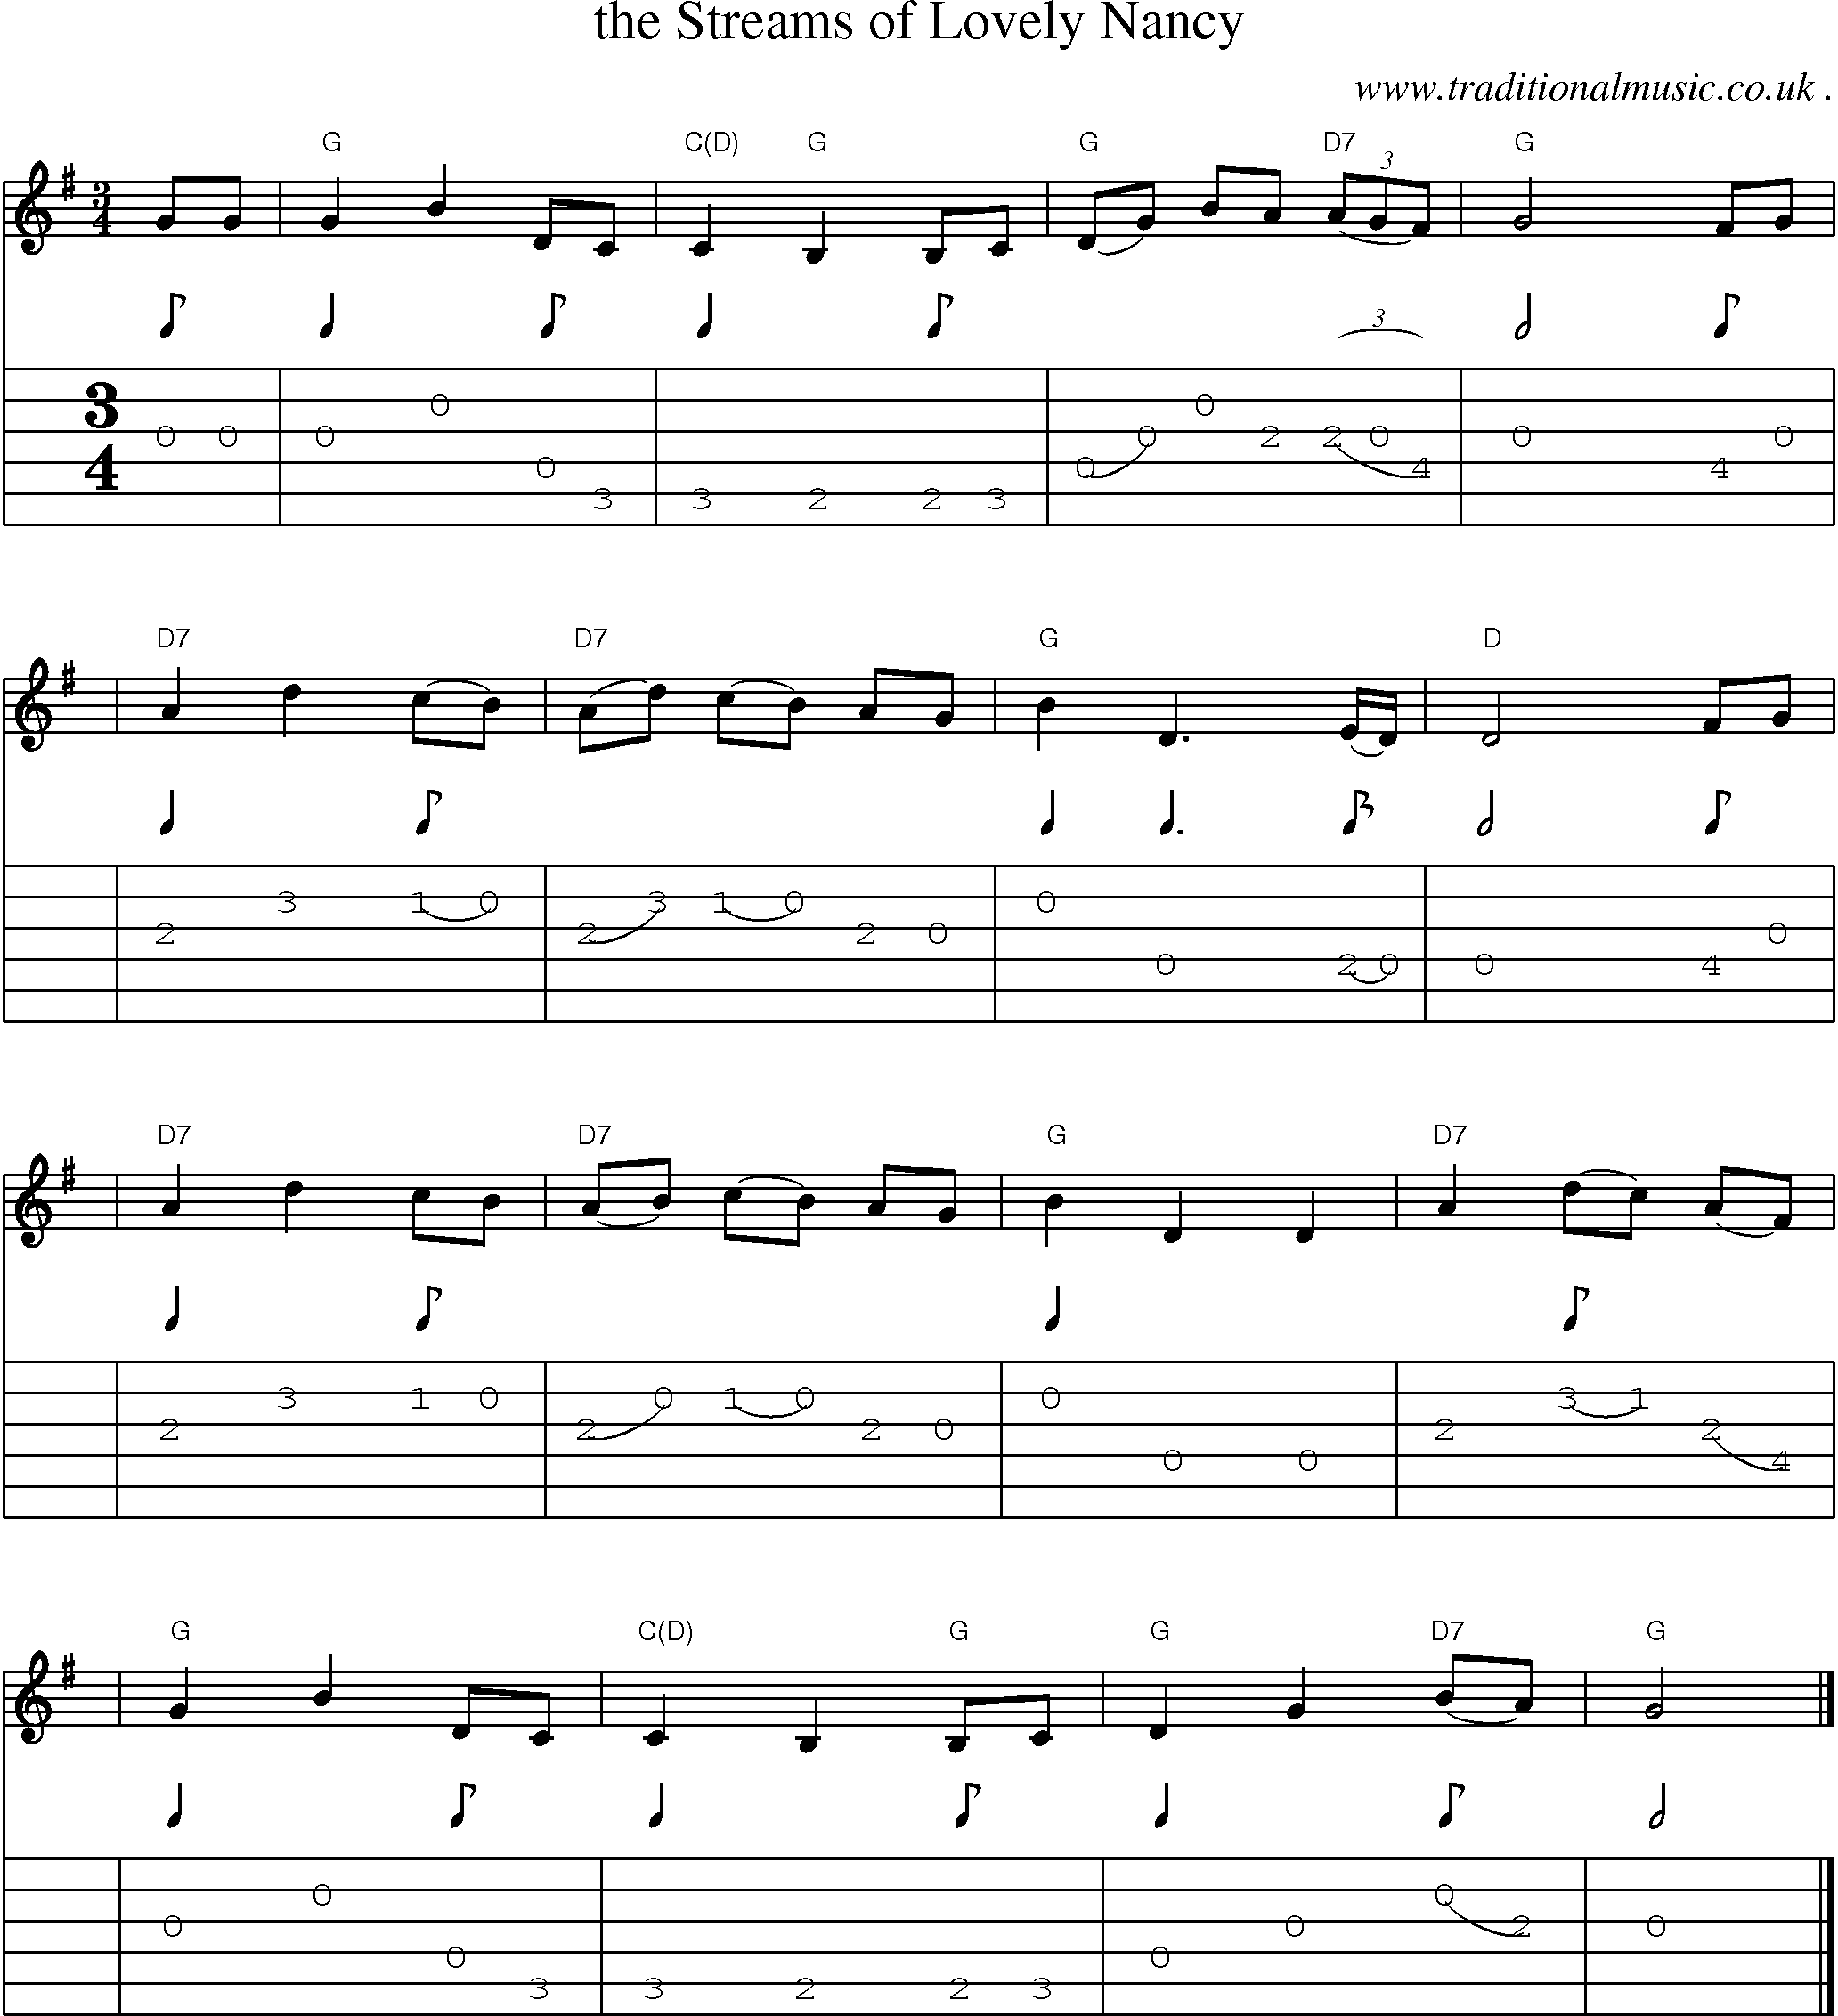 Sheet-music  score, Chords and Guitar Tabs for The Streams Of Lovely Nancy